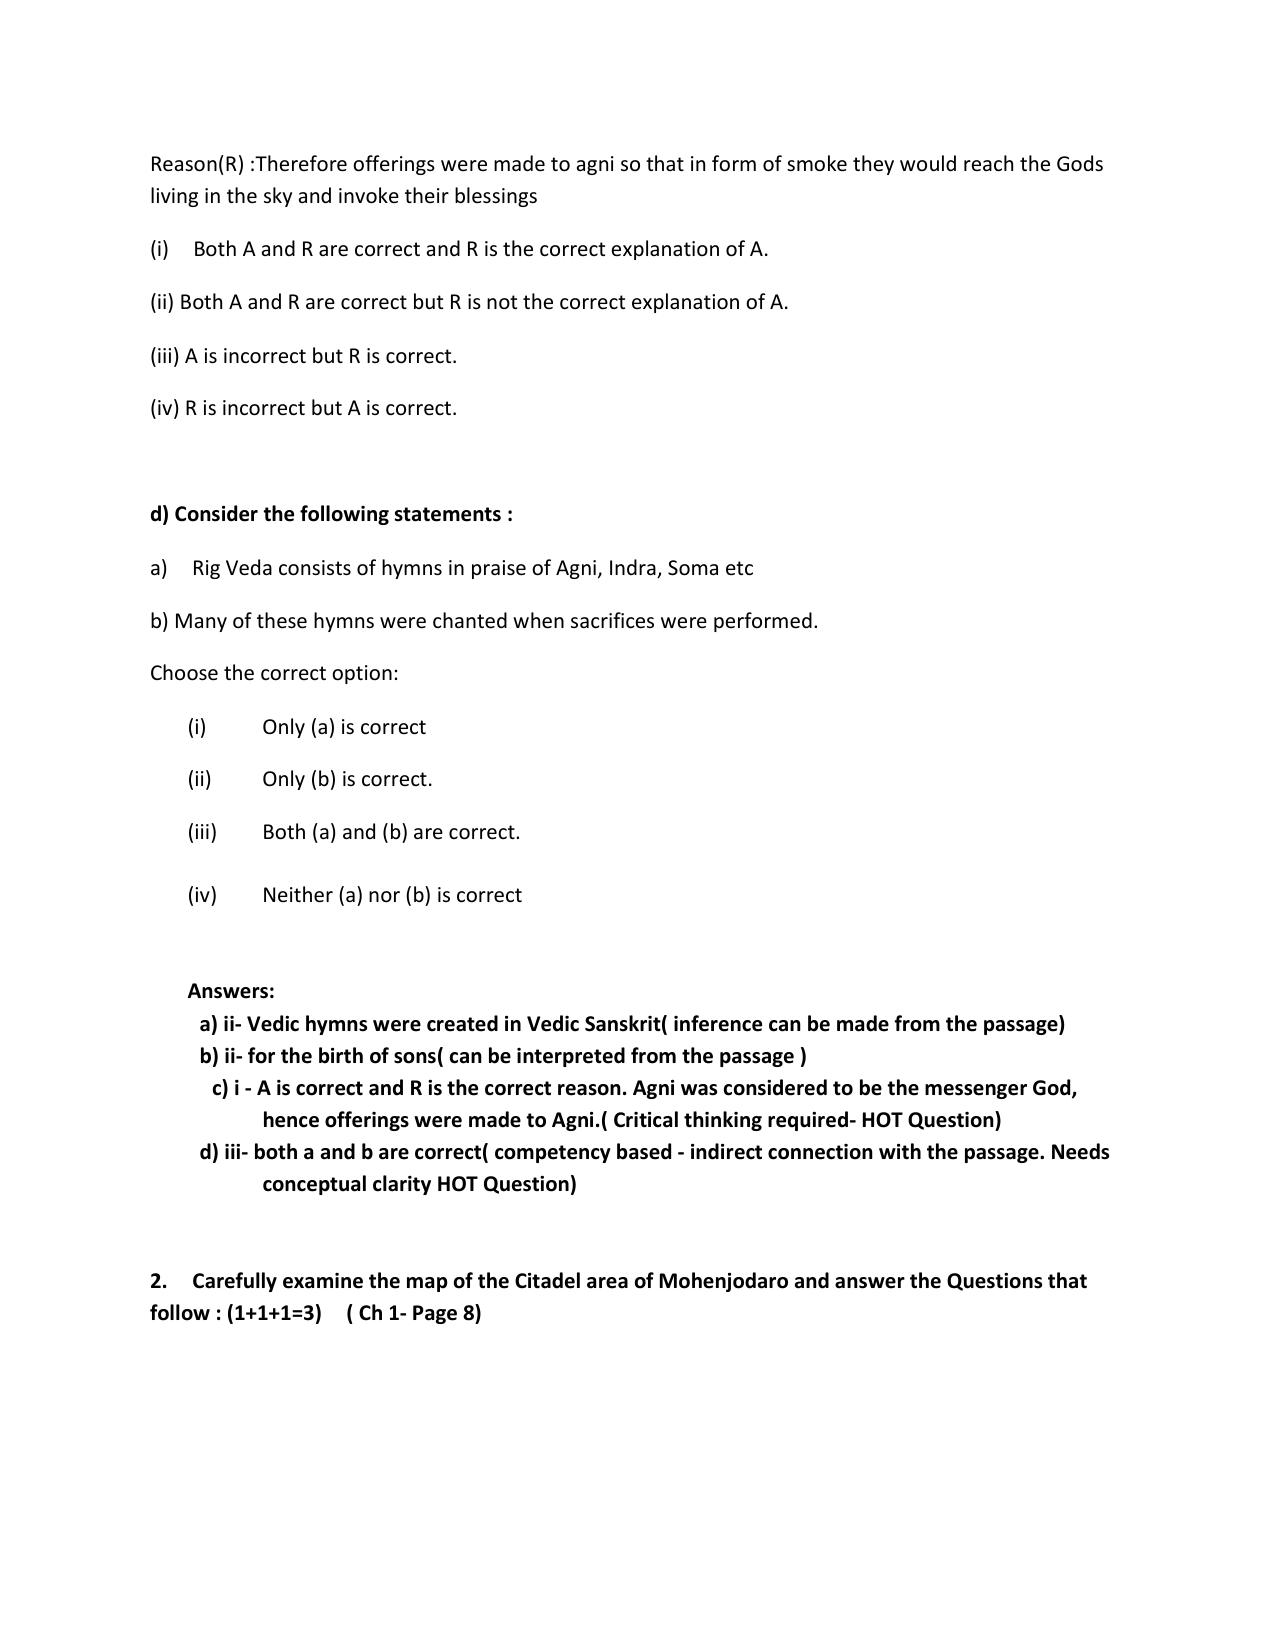 CBSE Class XII History Question Bank - Page 2